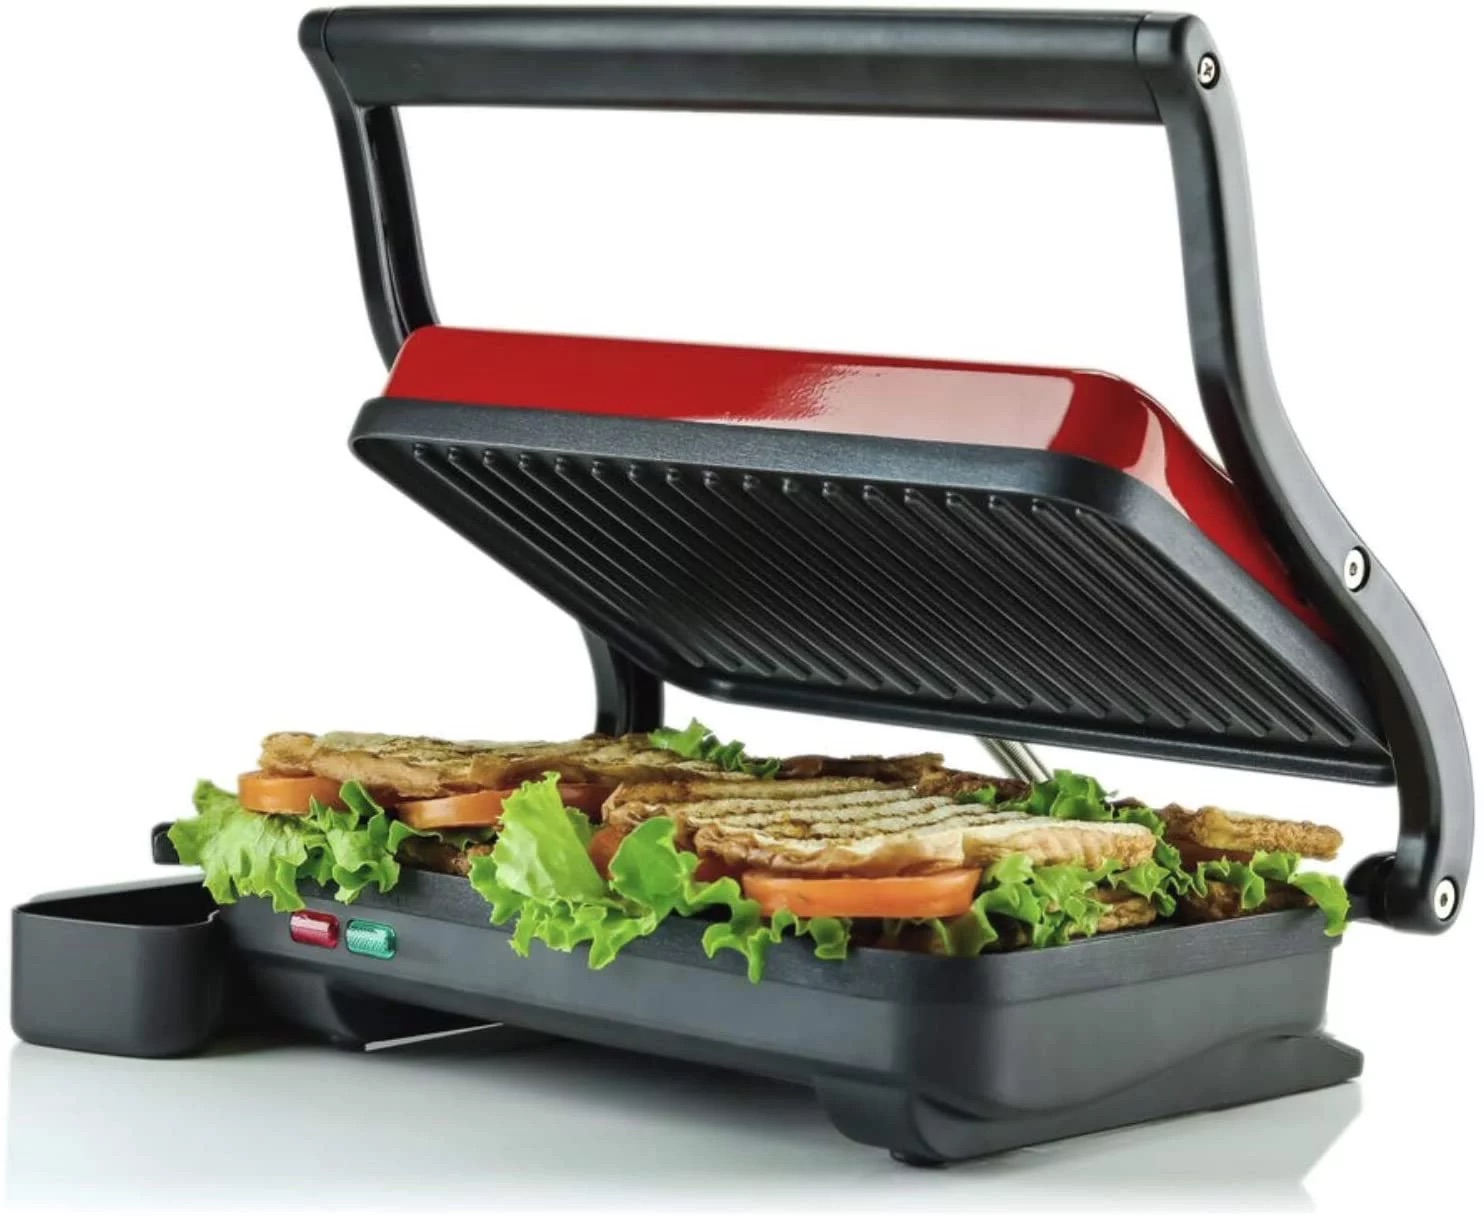 OSTBA Panini Press Grill Indoor Sandwich Maker with Temperature Setting, 4  Slice Large Non-stick Versatile Grill, Opens 180 Degrees to Fit Any Type or